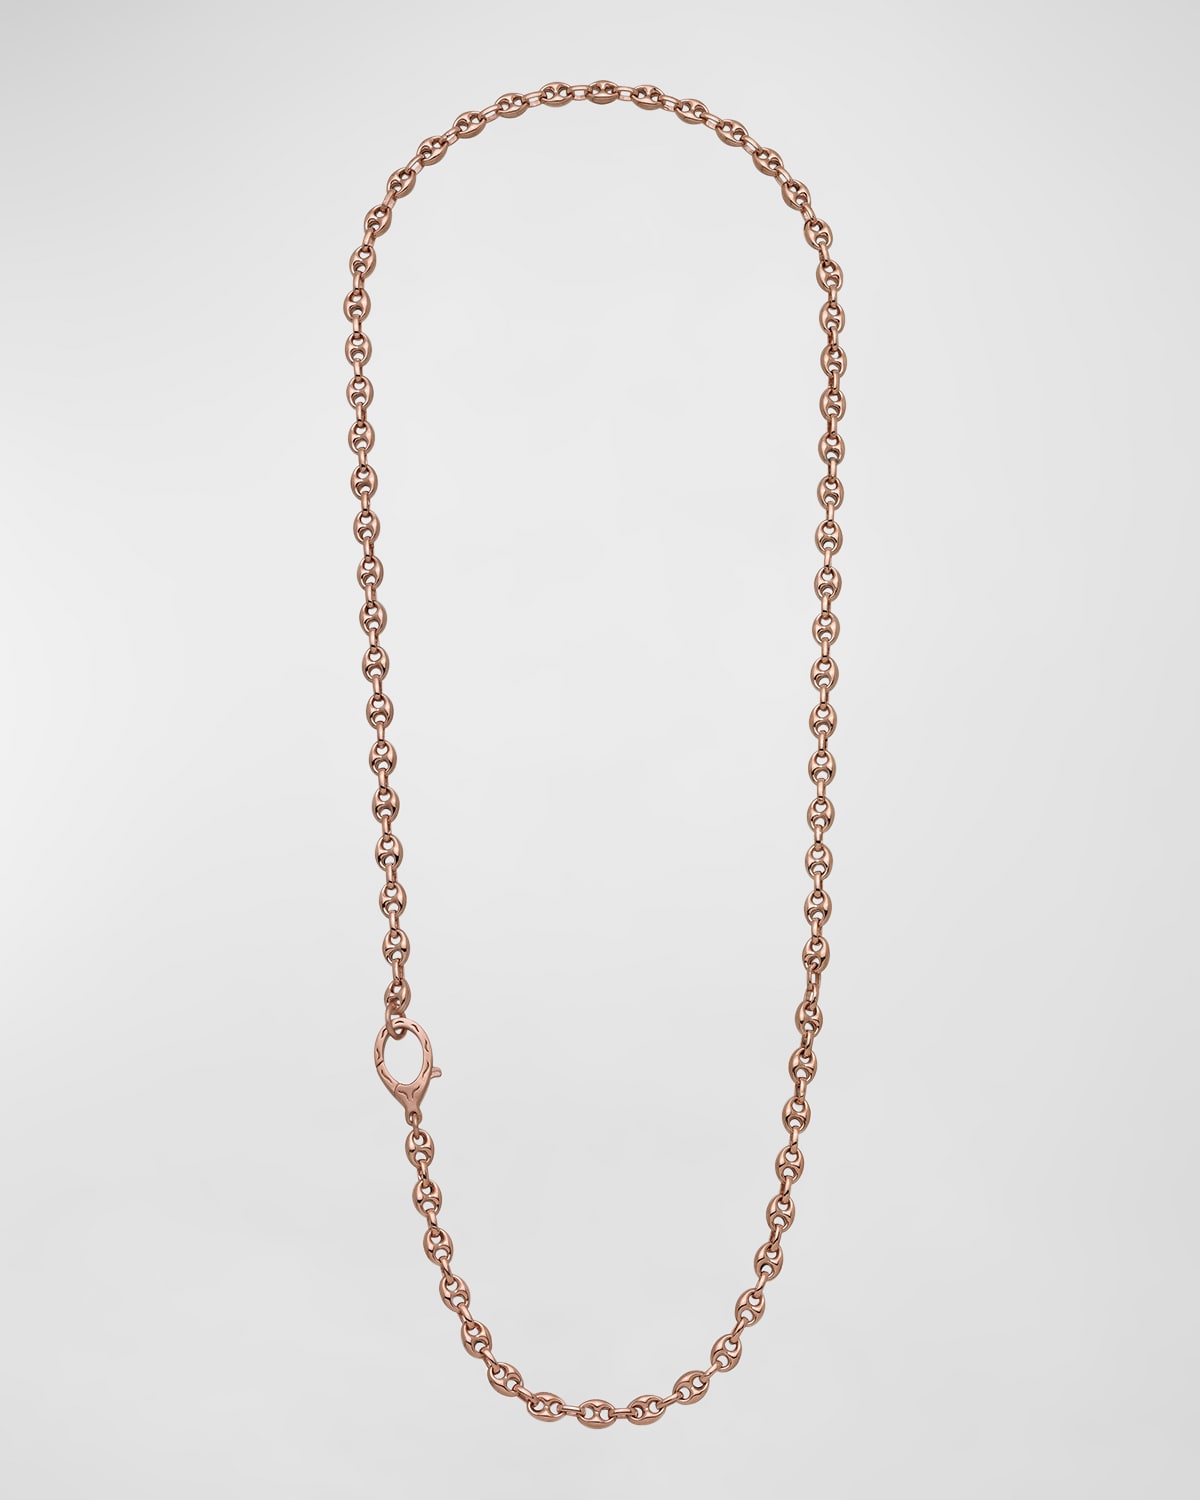 Marco Dal Maso Marine Rose Gold Plated Necklace in Polished Chain and Matte Clasp, 20"L